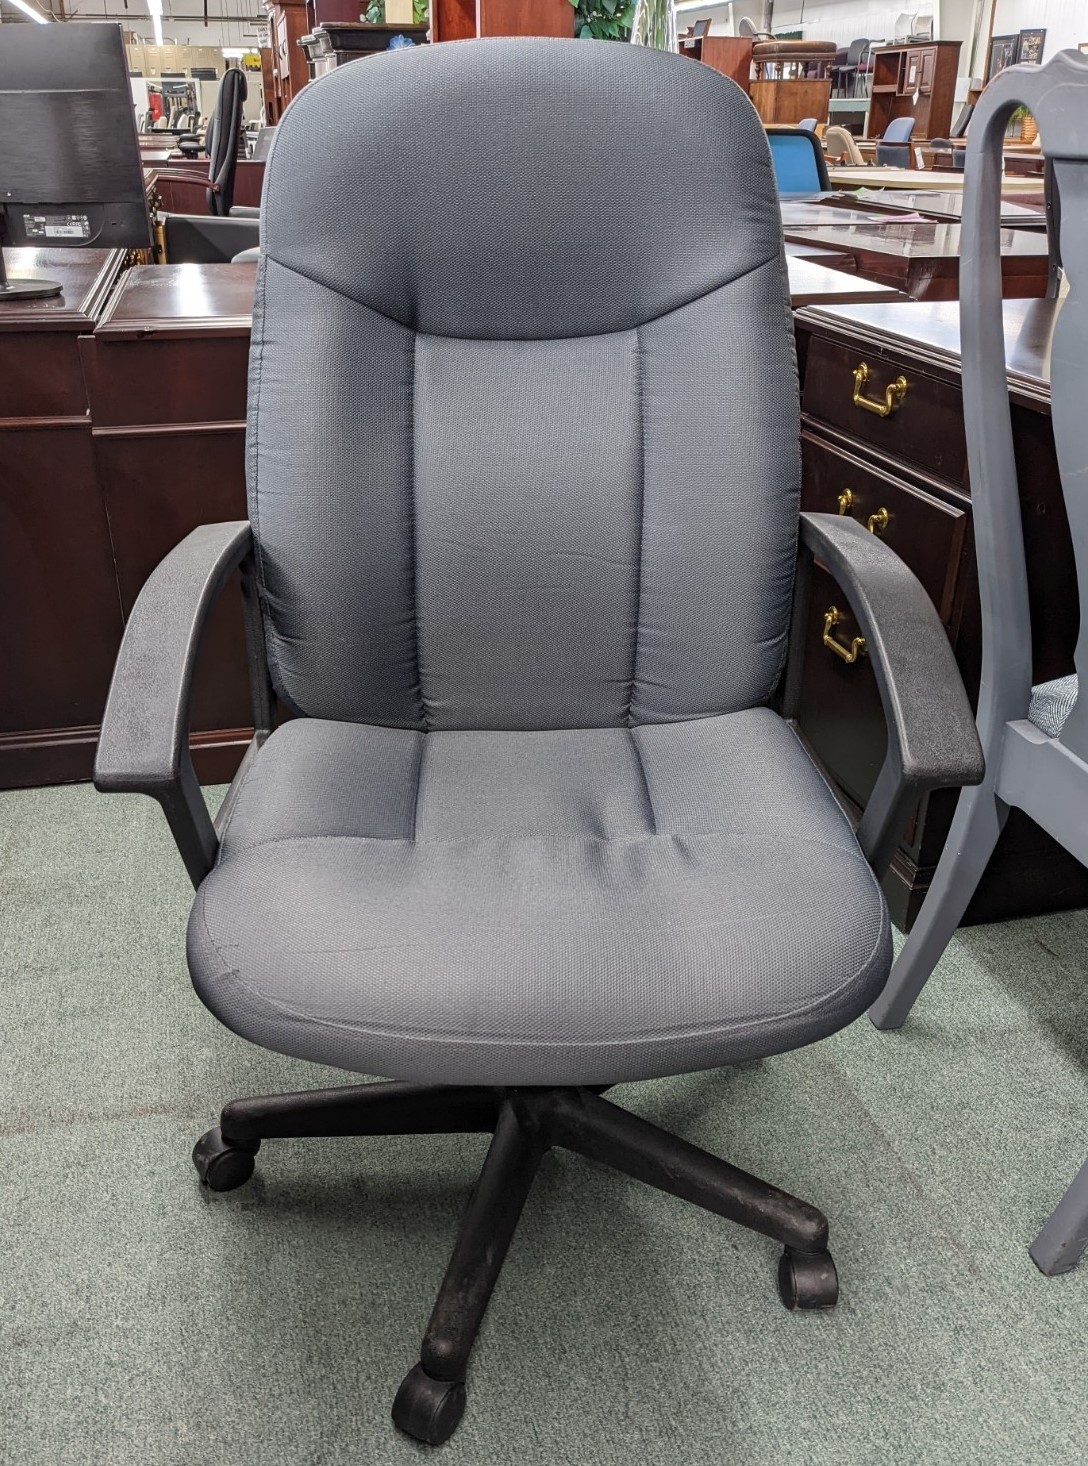 Used Gray Adjustable Executive Office Chair